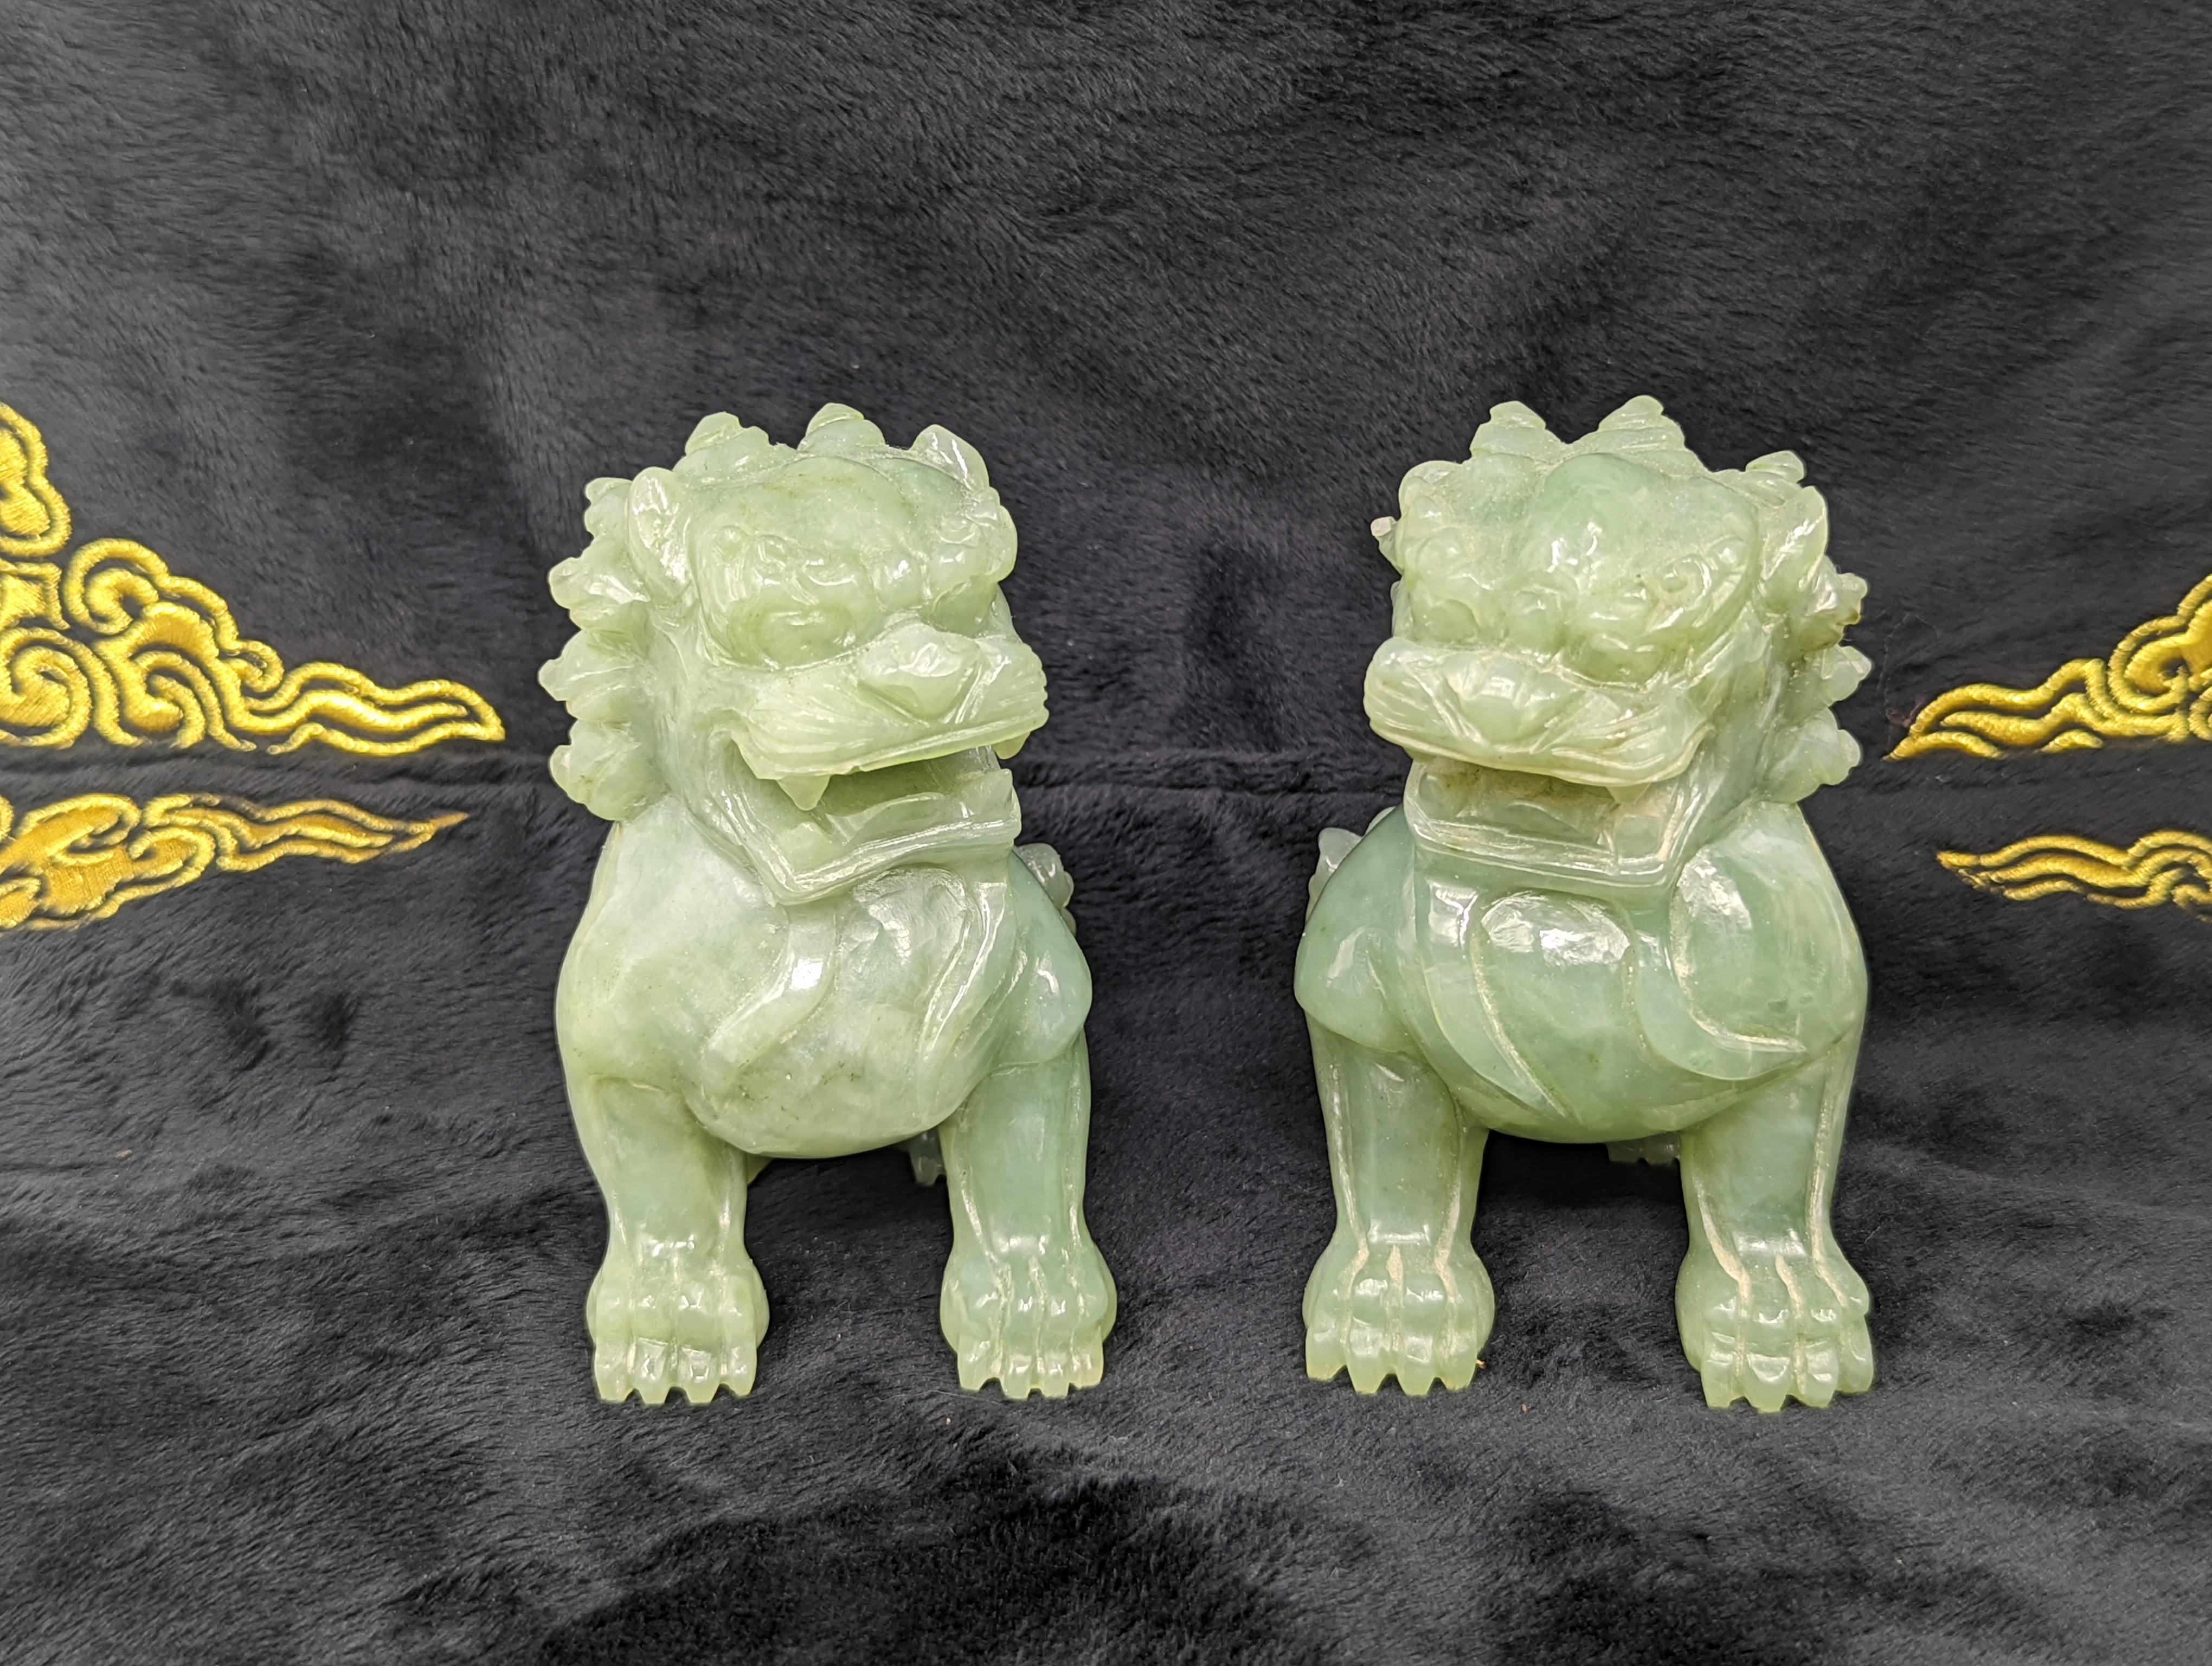 This exquisite pair of celadon jade guardian lions hails from the early Republic of China period, a testament to the era's craftsmanship. The lions are intricately carved from high-quality celadon jade, a material revered for its subtle, pale green